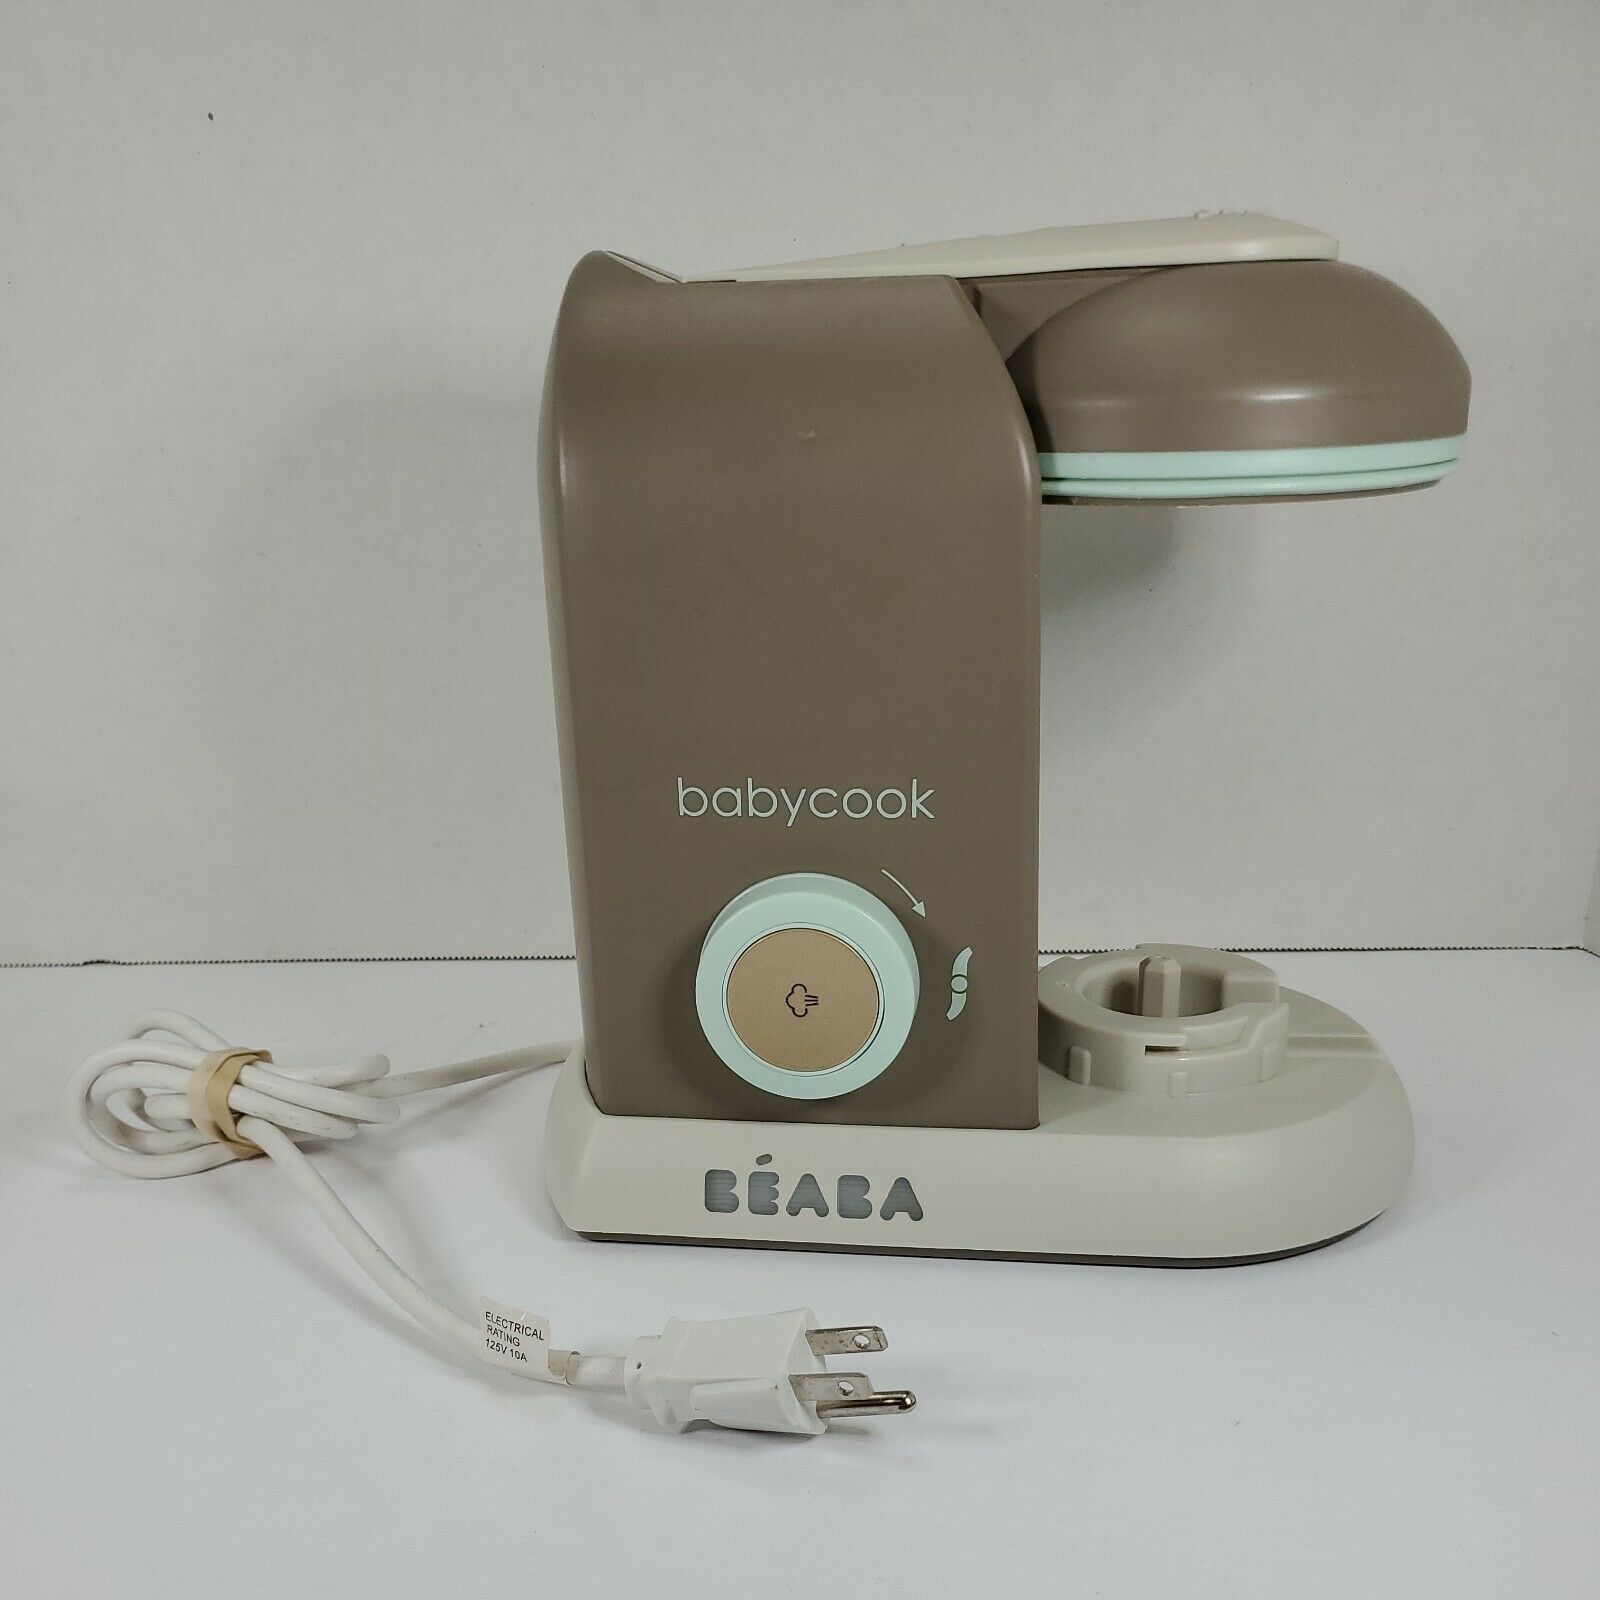 Beaba Babycook Solo Electric Baby Food Maker Processor Bea010a - Base Unit Only